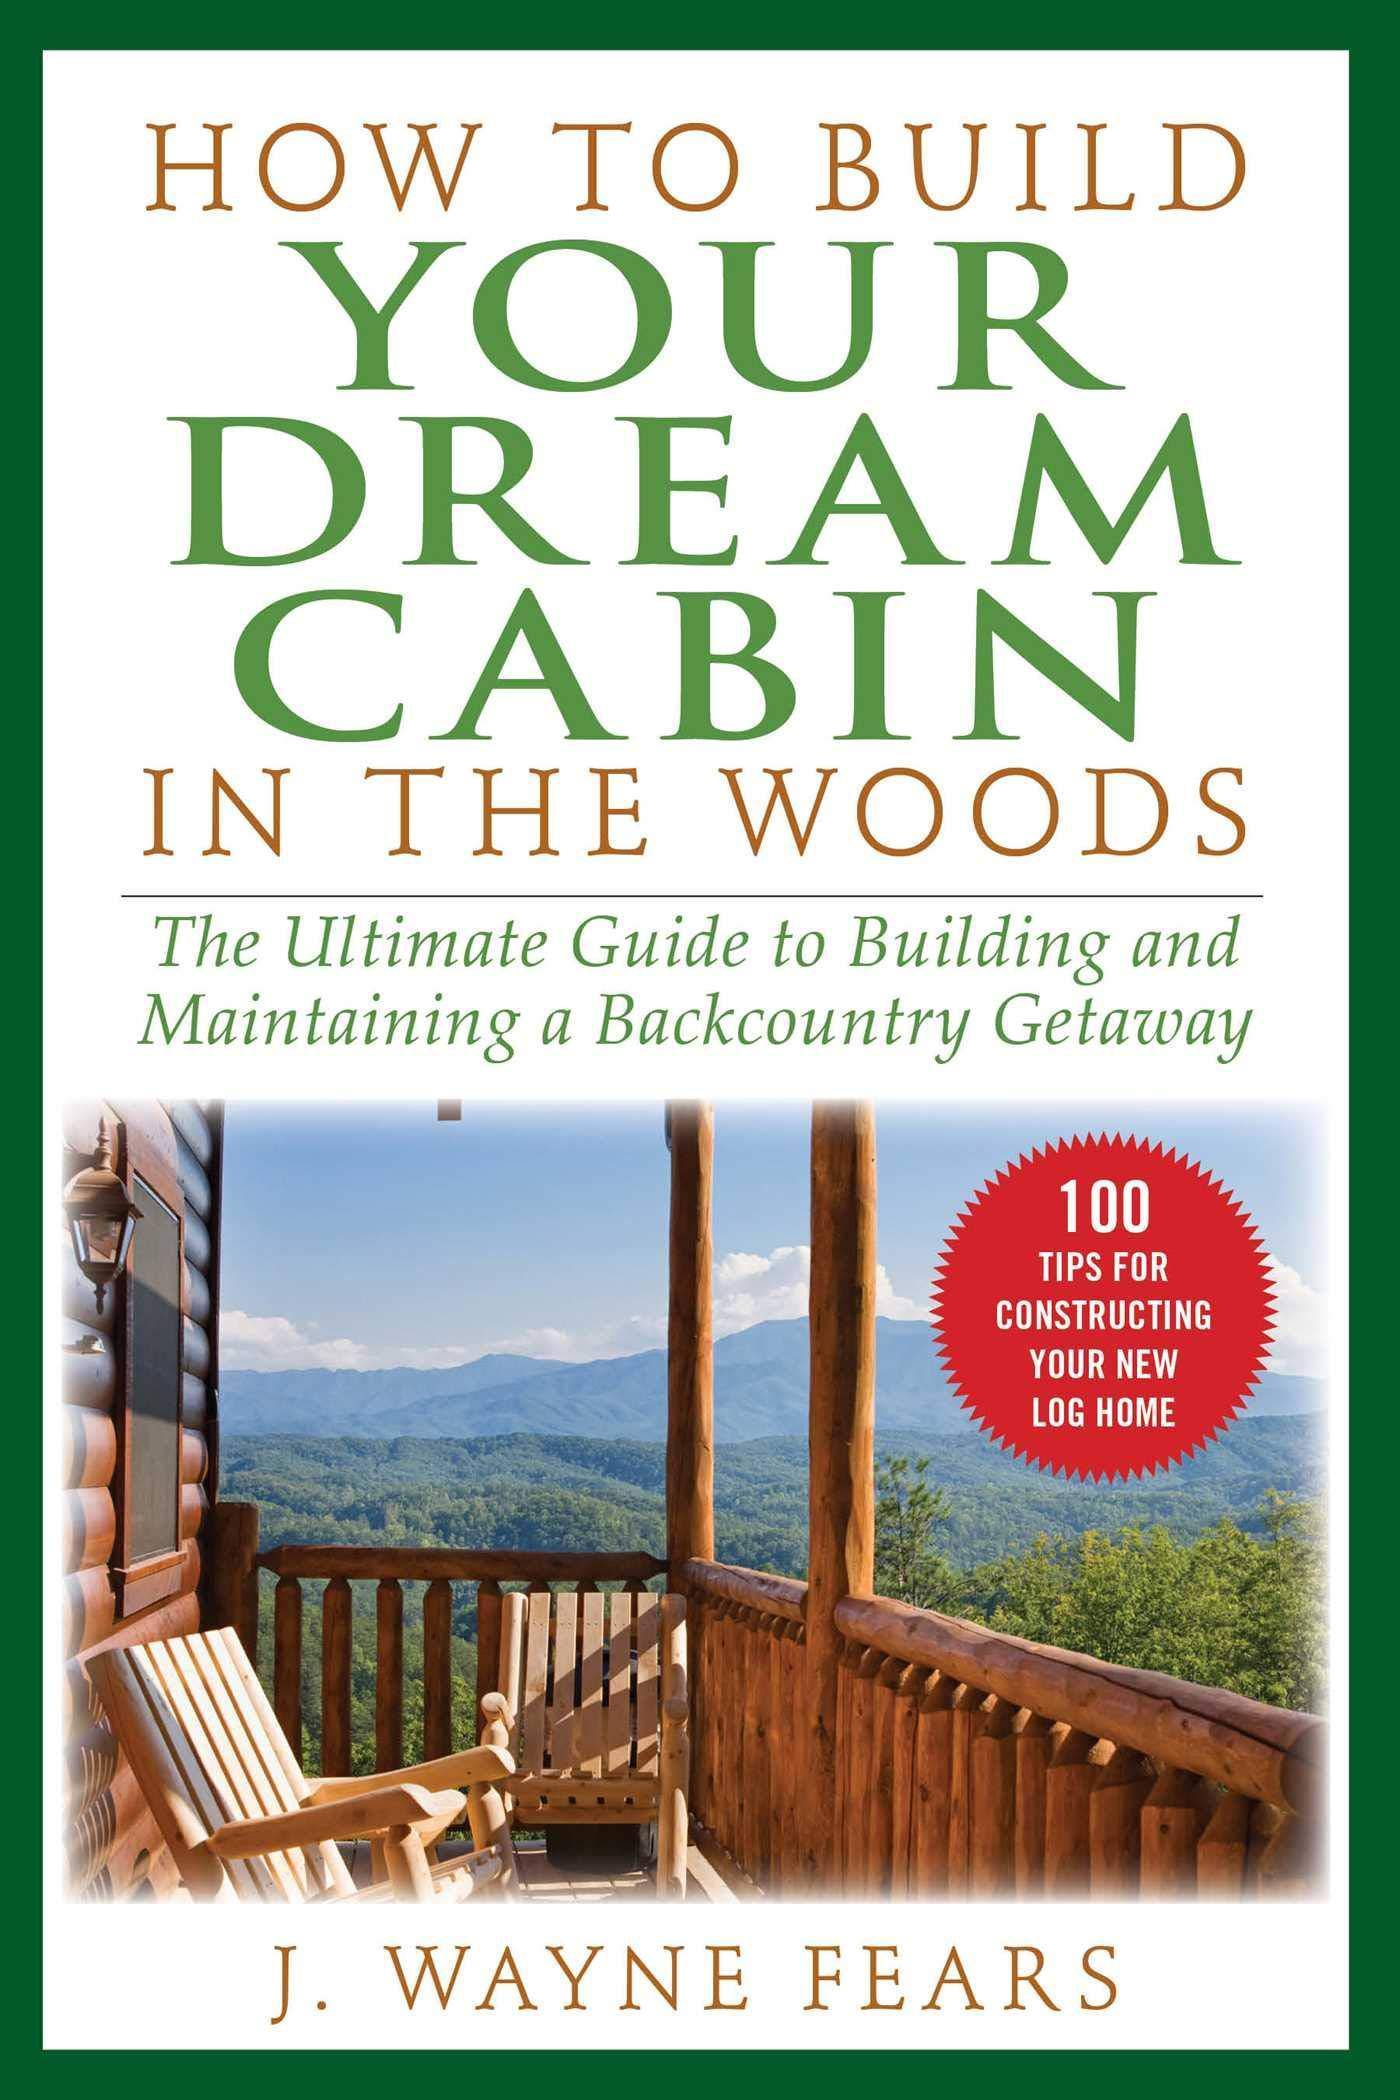 How to Build Your Dream Cabin in the Woods - SureShot Books Publishing LLC